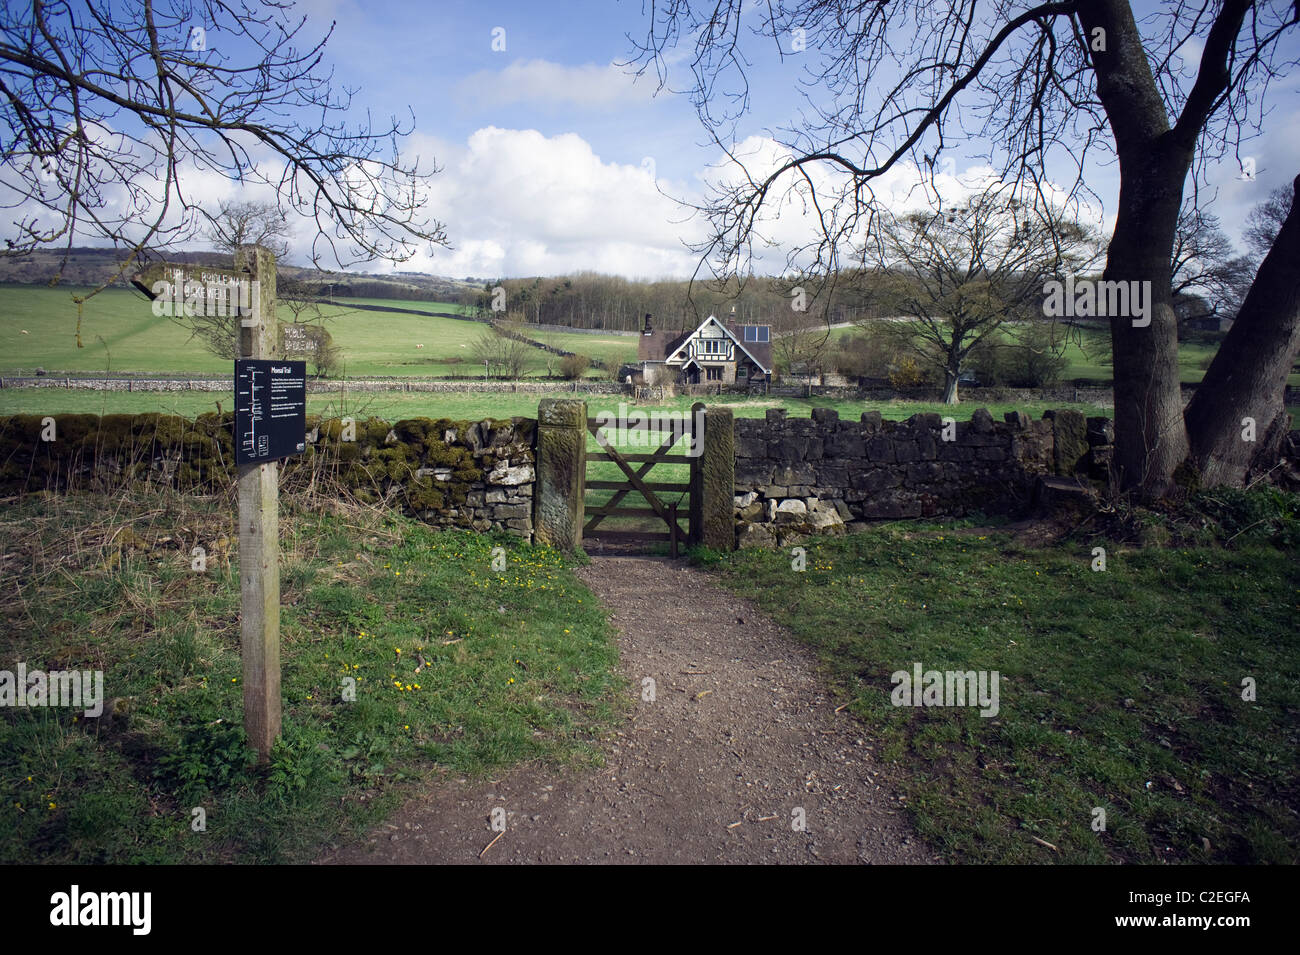 Footpath and signpost pointing to Bakewell leading off the Monsal Trail at Hassop Derbyshire,'Peak District',England Stock Photo